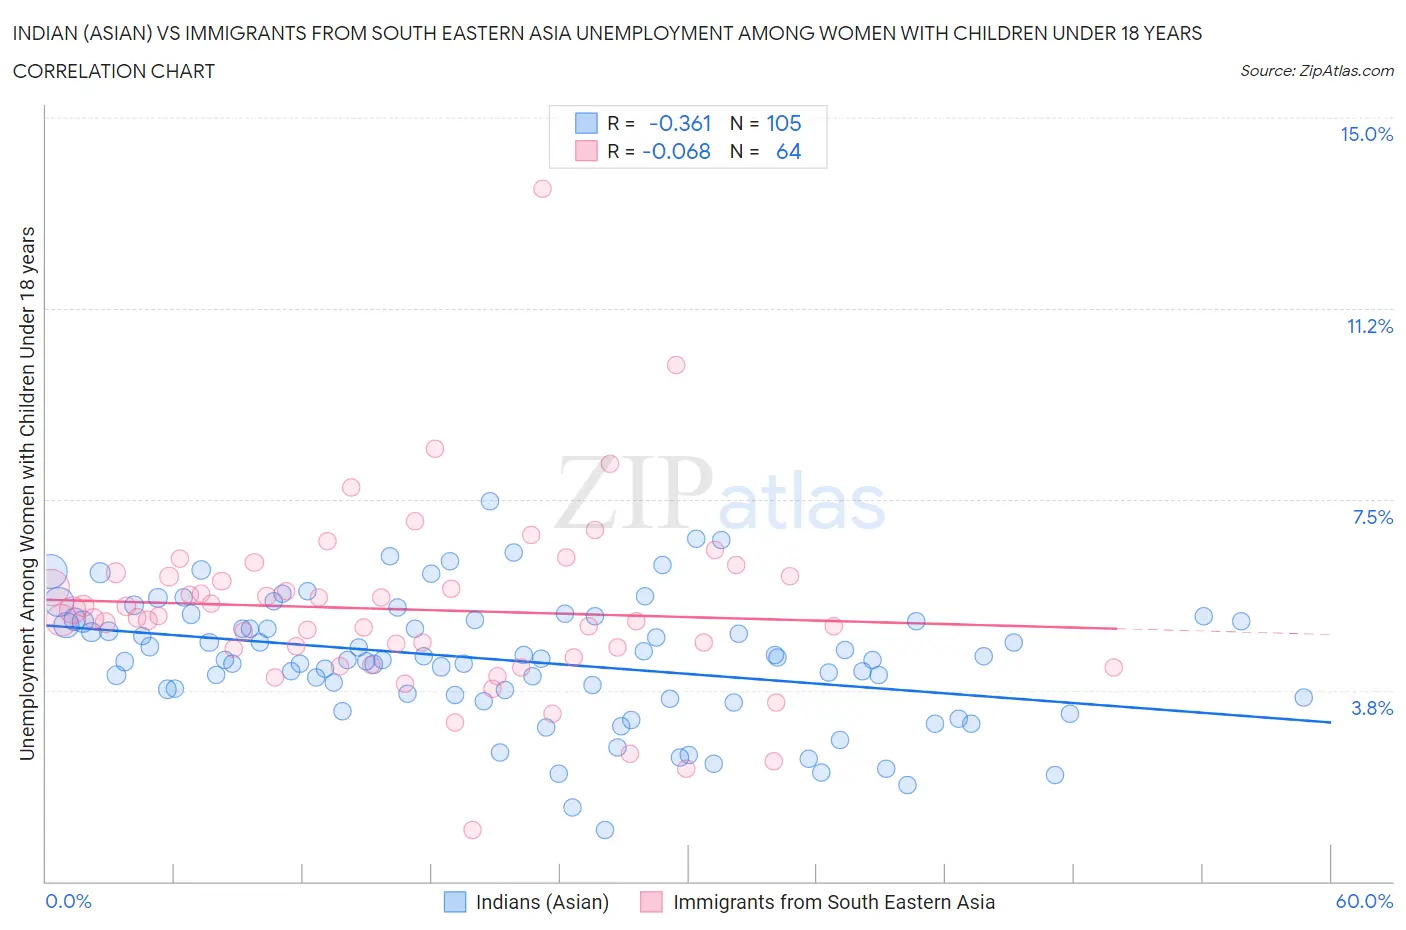 Indian (Asian) vs Immigrants from South Eastern Asia Unemployment Among Women with Children Under 18 years